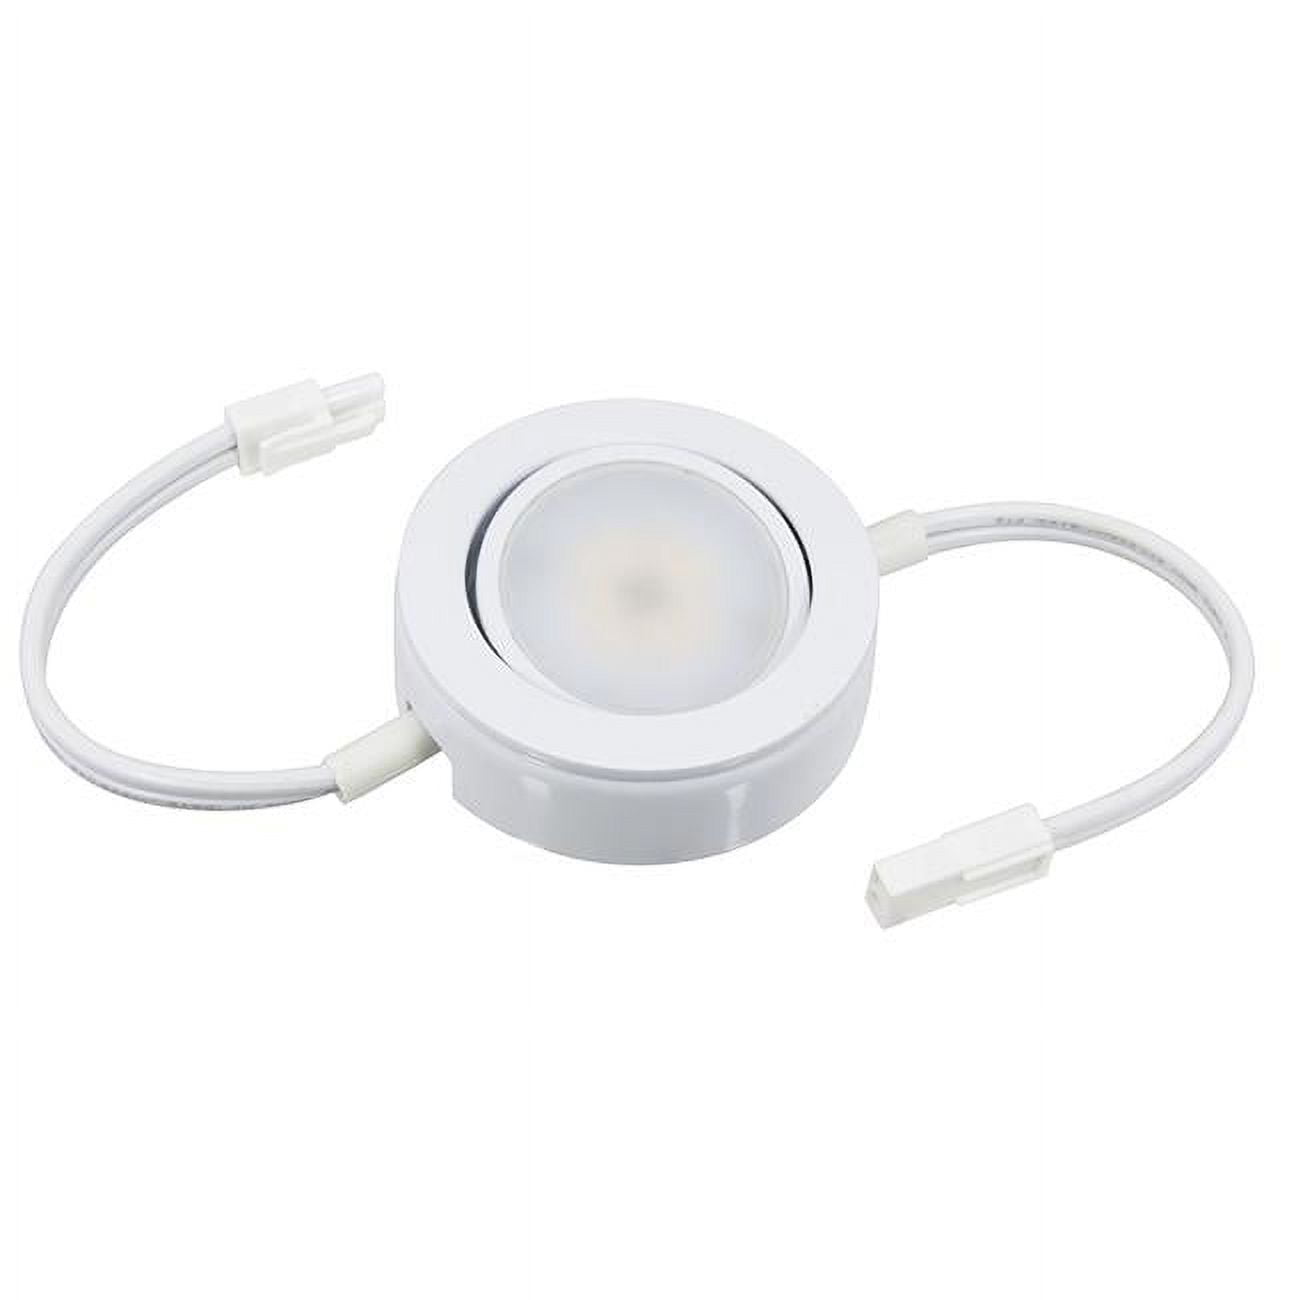 Dimmable Led Puck Light With 6 In. Lead Wire, 6 In. Tail Wire & Mounting Screws, 120 V Ac, 4 Watt - White